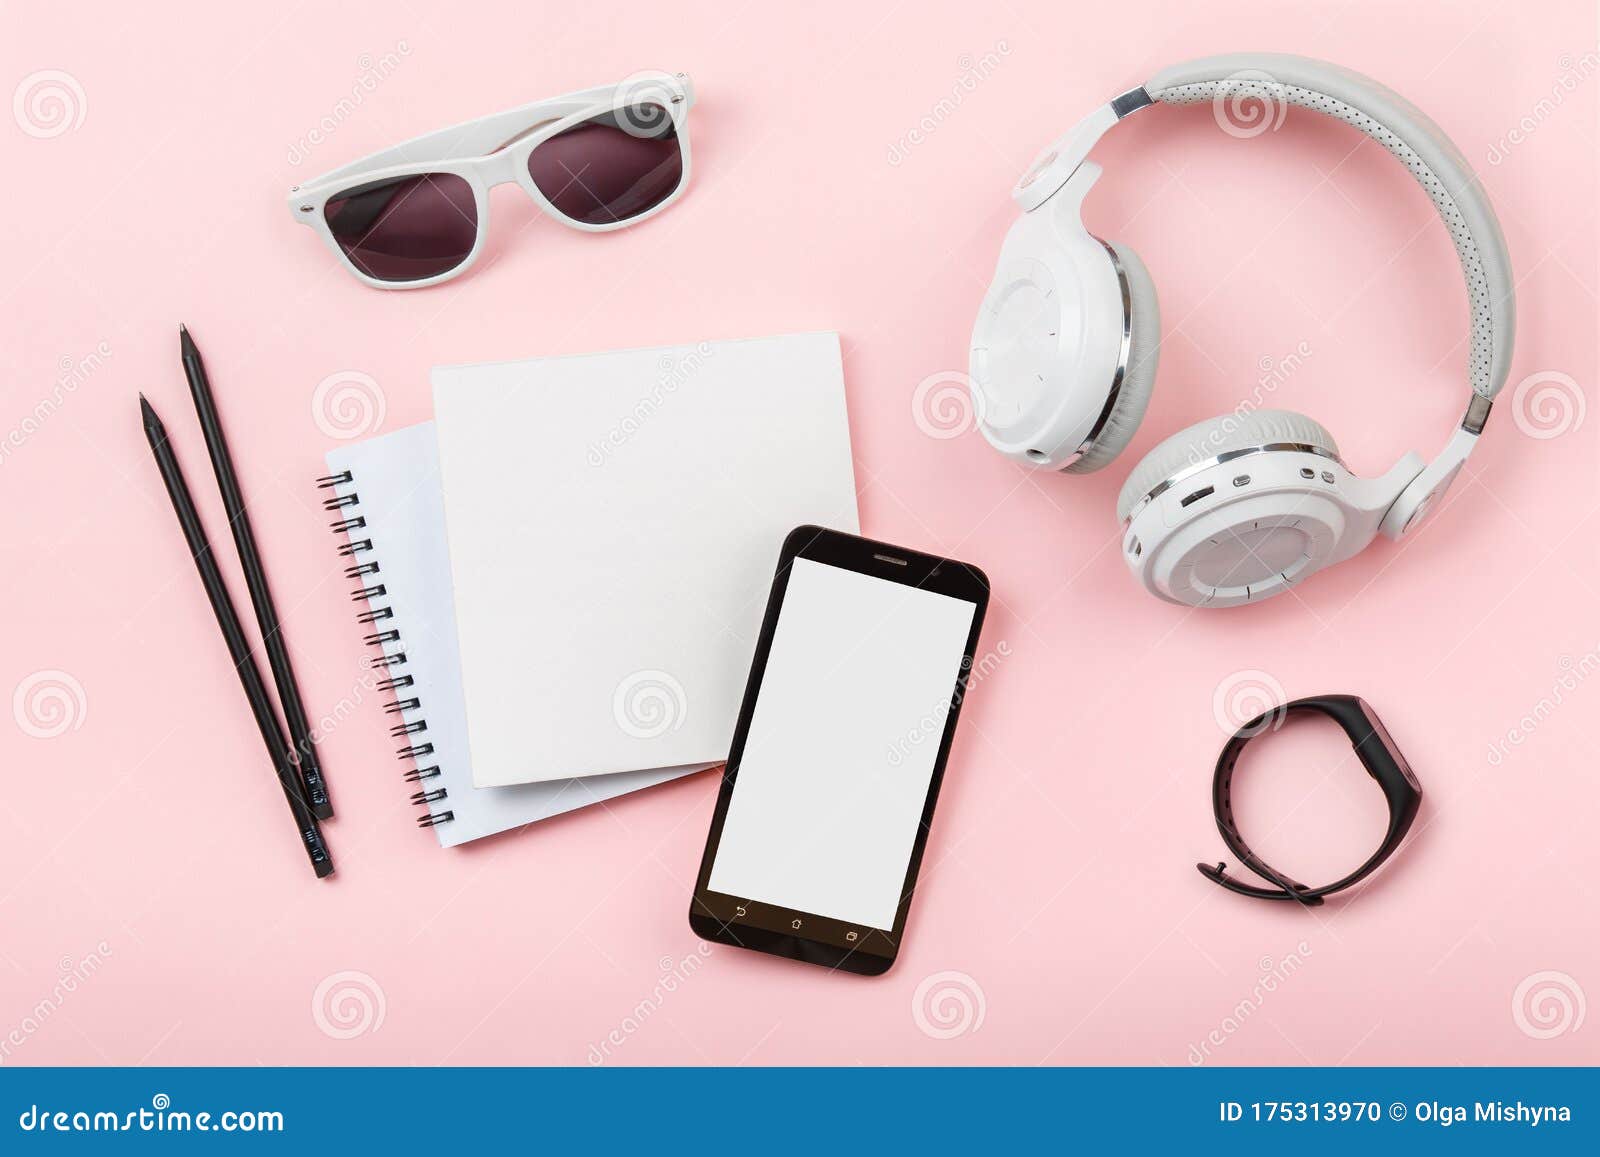 Download Top View Mock Up Phone, Headphones And Glasses On Pink ...